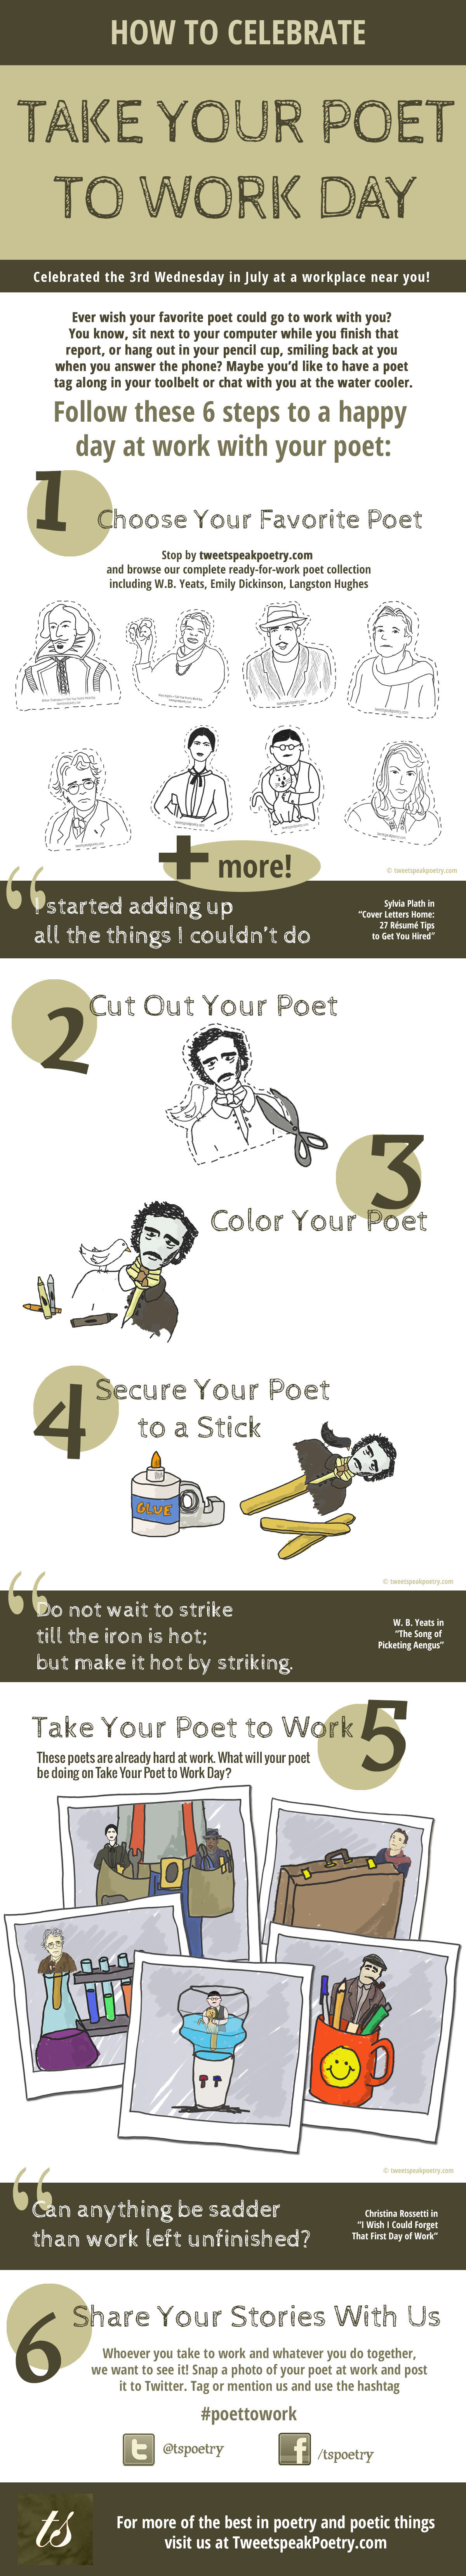 Take Your Poet to Work Day Timeless infographic